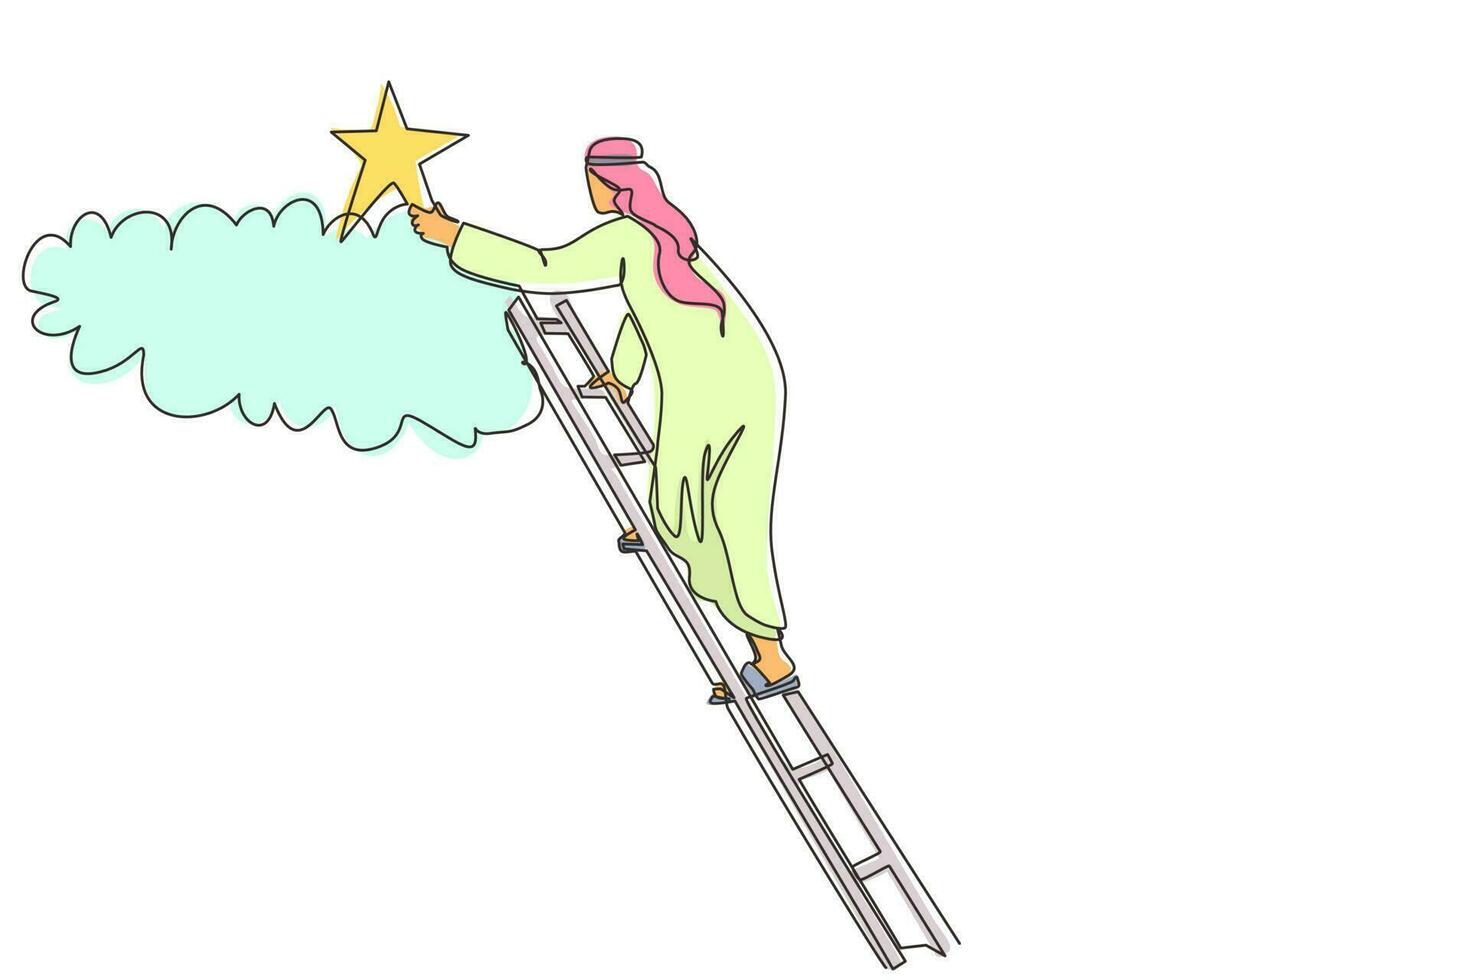 Single one line drawing Arab businessman is standing on stairs and reaching star on the sky. Goals and dreams. Business, career, achievement concept. Continuous line design graphic vector illustration